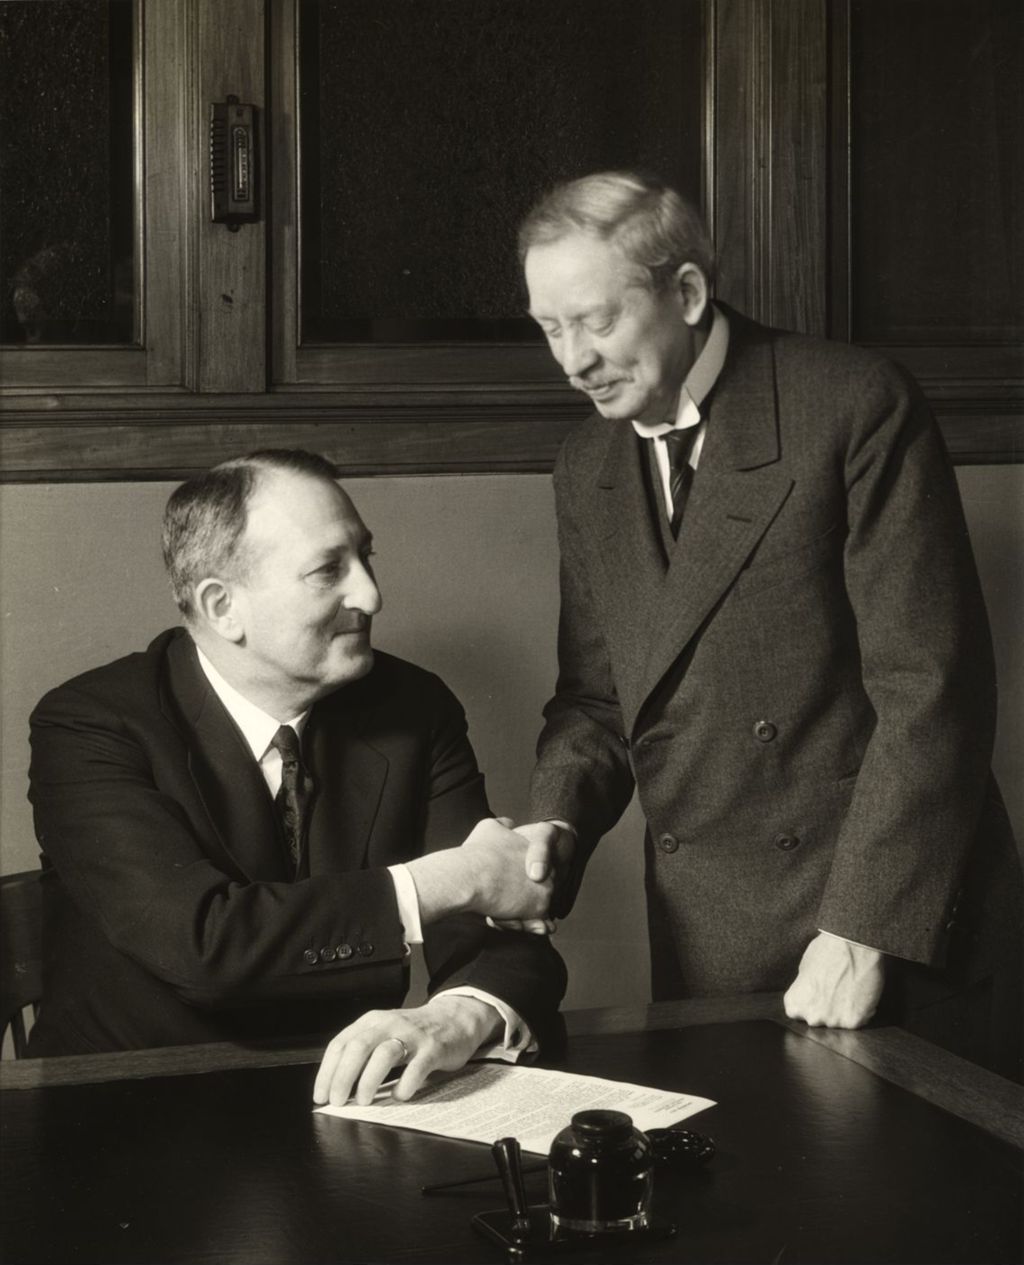 Miniature of G.F. Swift, President of Swift and Company signing a contract with Dr. Frederick A. Stock, conductor of the Chicago Symphony Orchestra